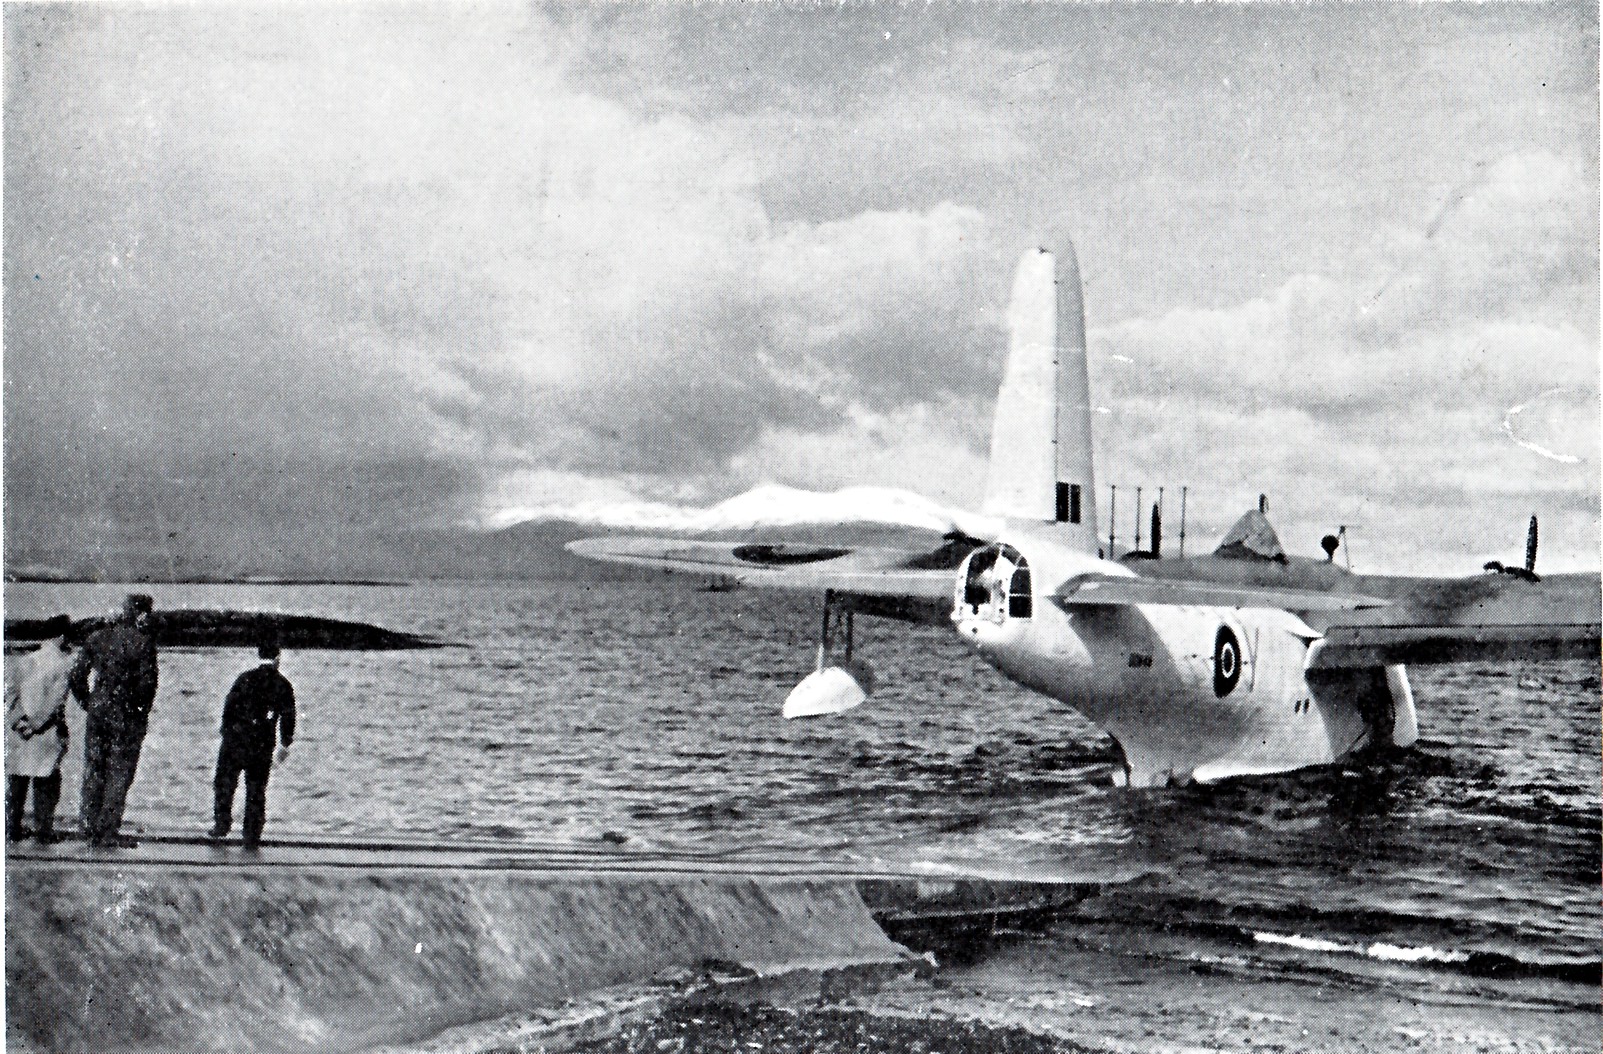 Egeberg served as groundcrew in 330 (N) Squadron at RAF Oban. The squadron had recently converted to Short Sunderland flying boats when Egeberg joined the squadron.